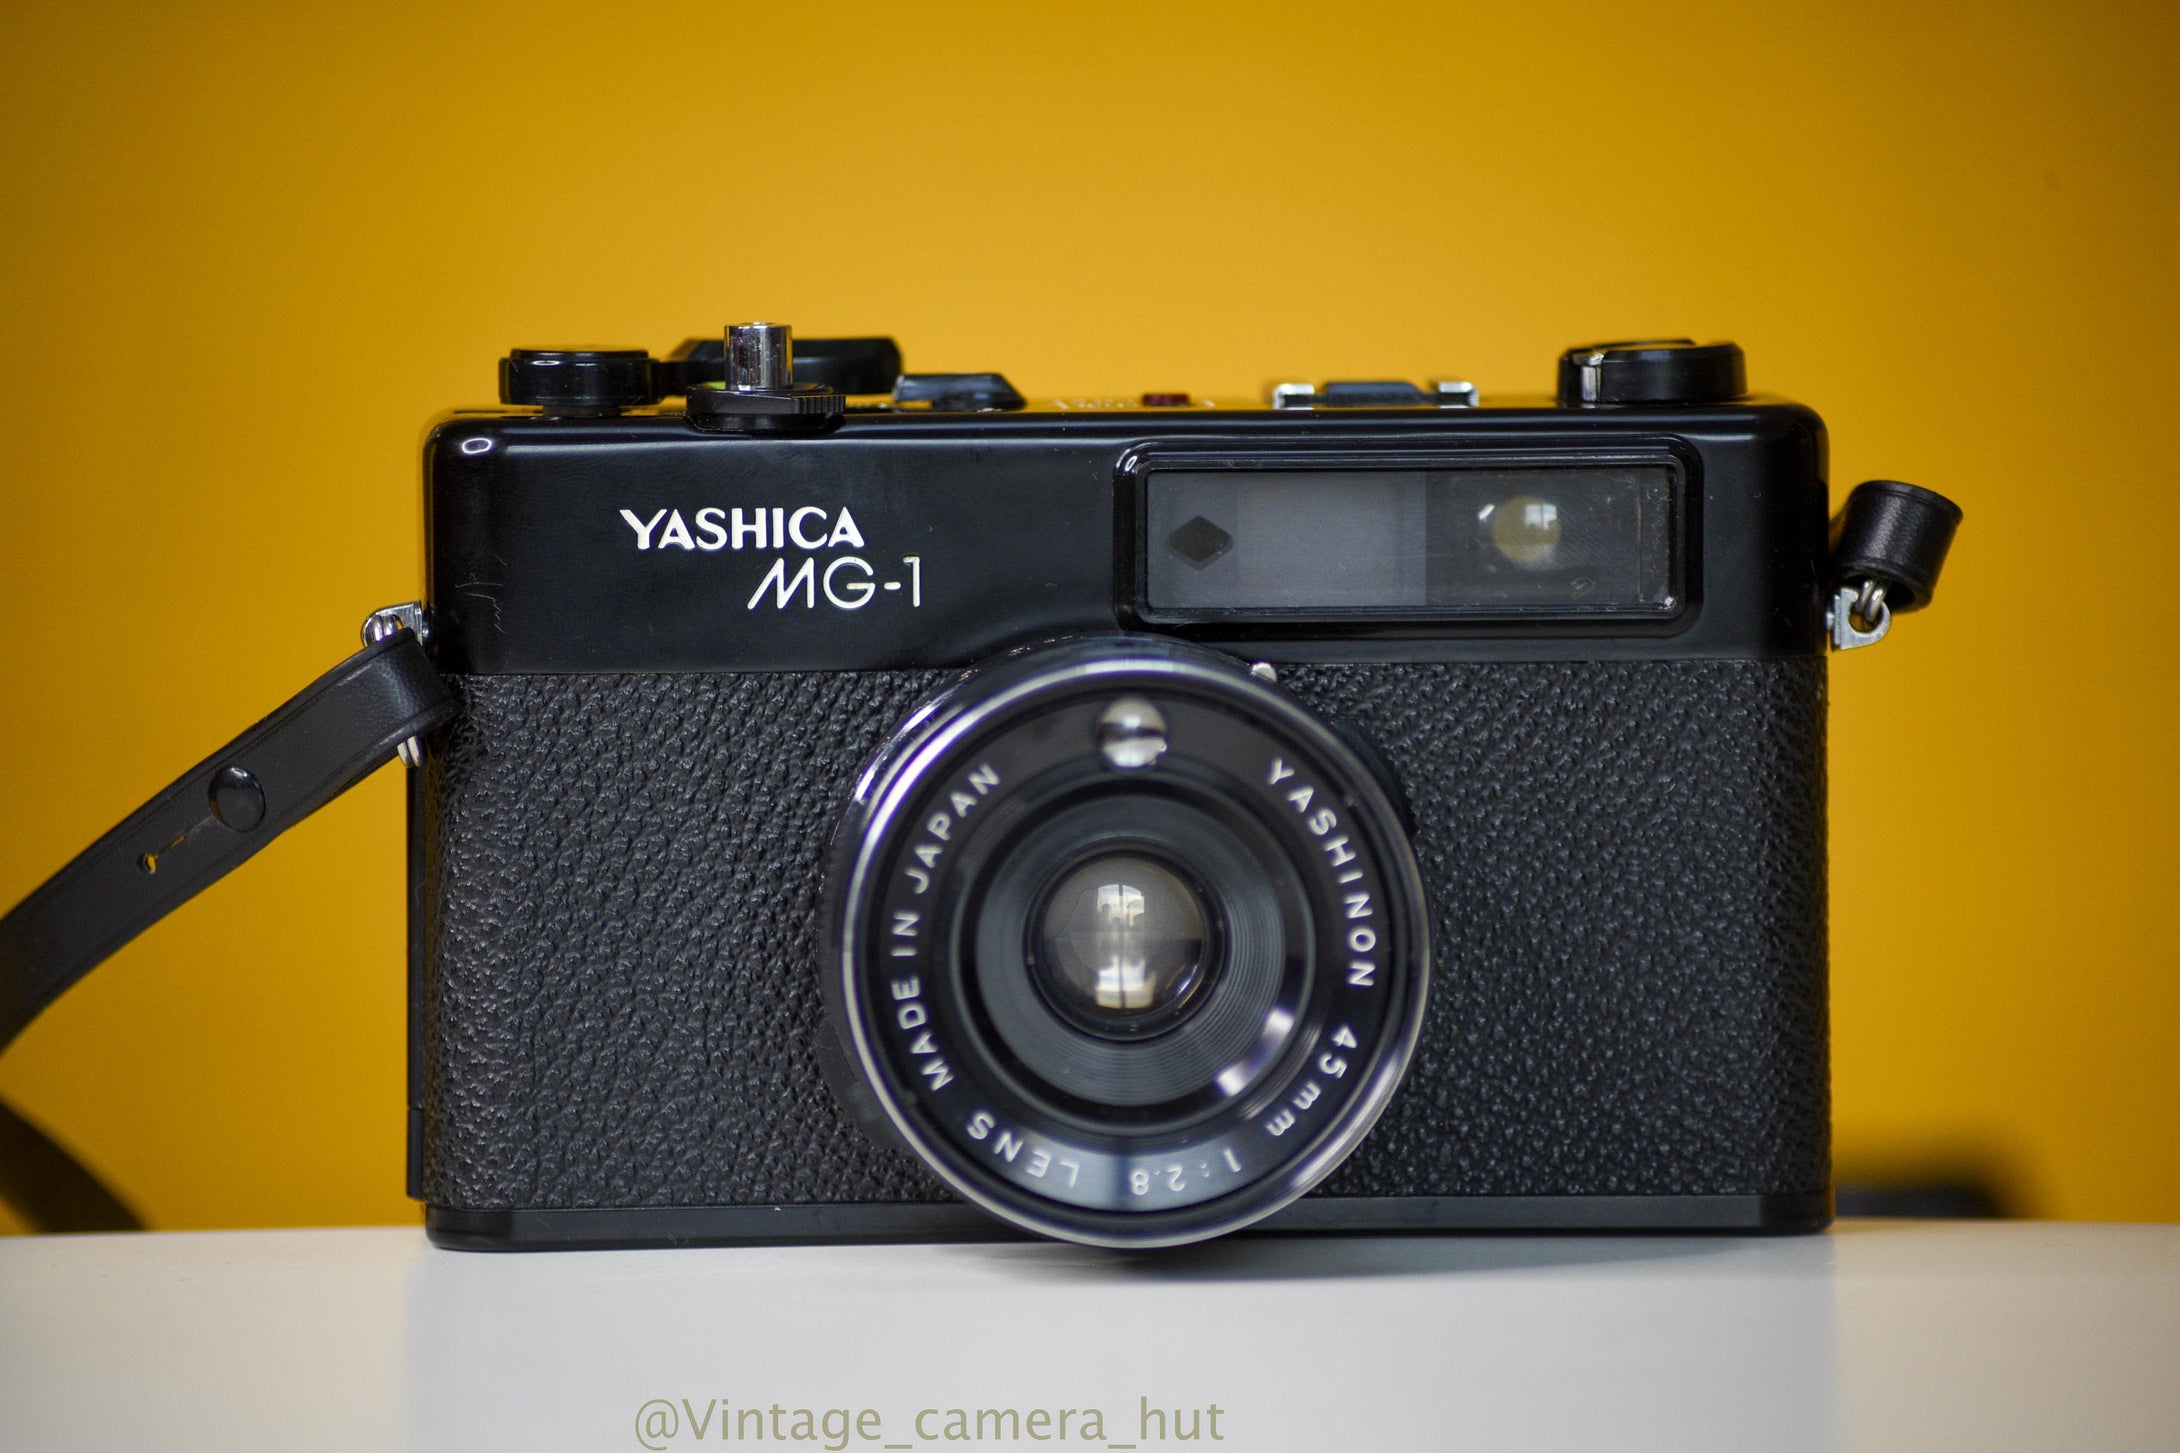 Yashica MG-1 35mm Film Camera with Strap